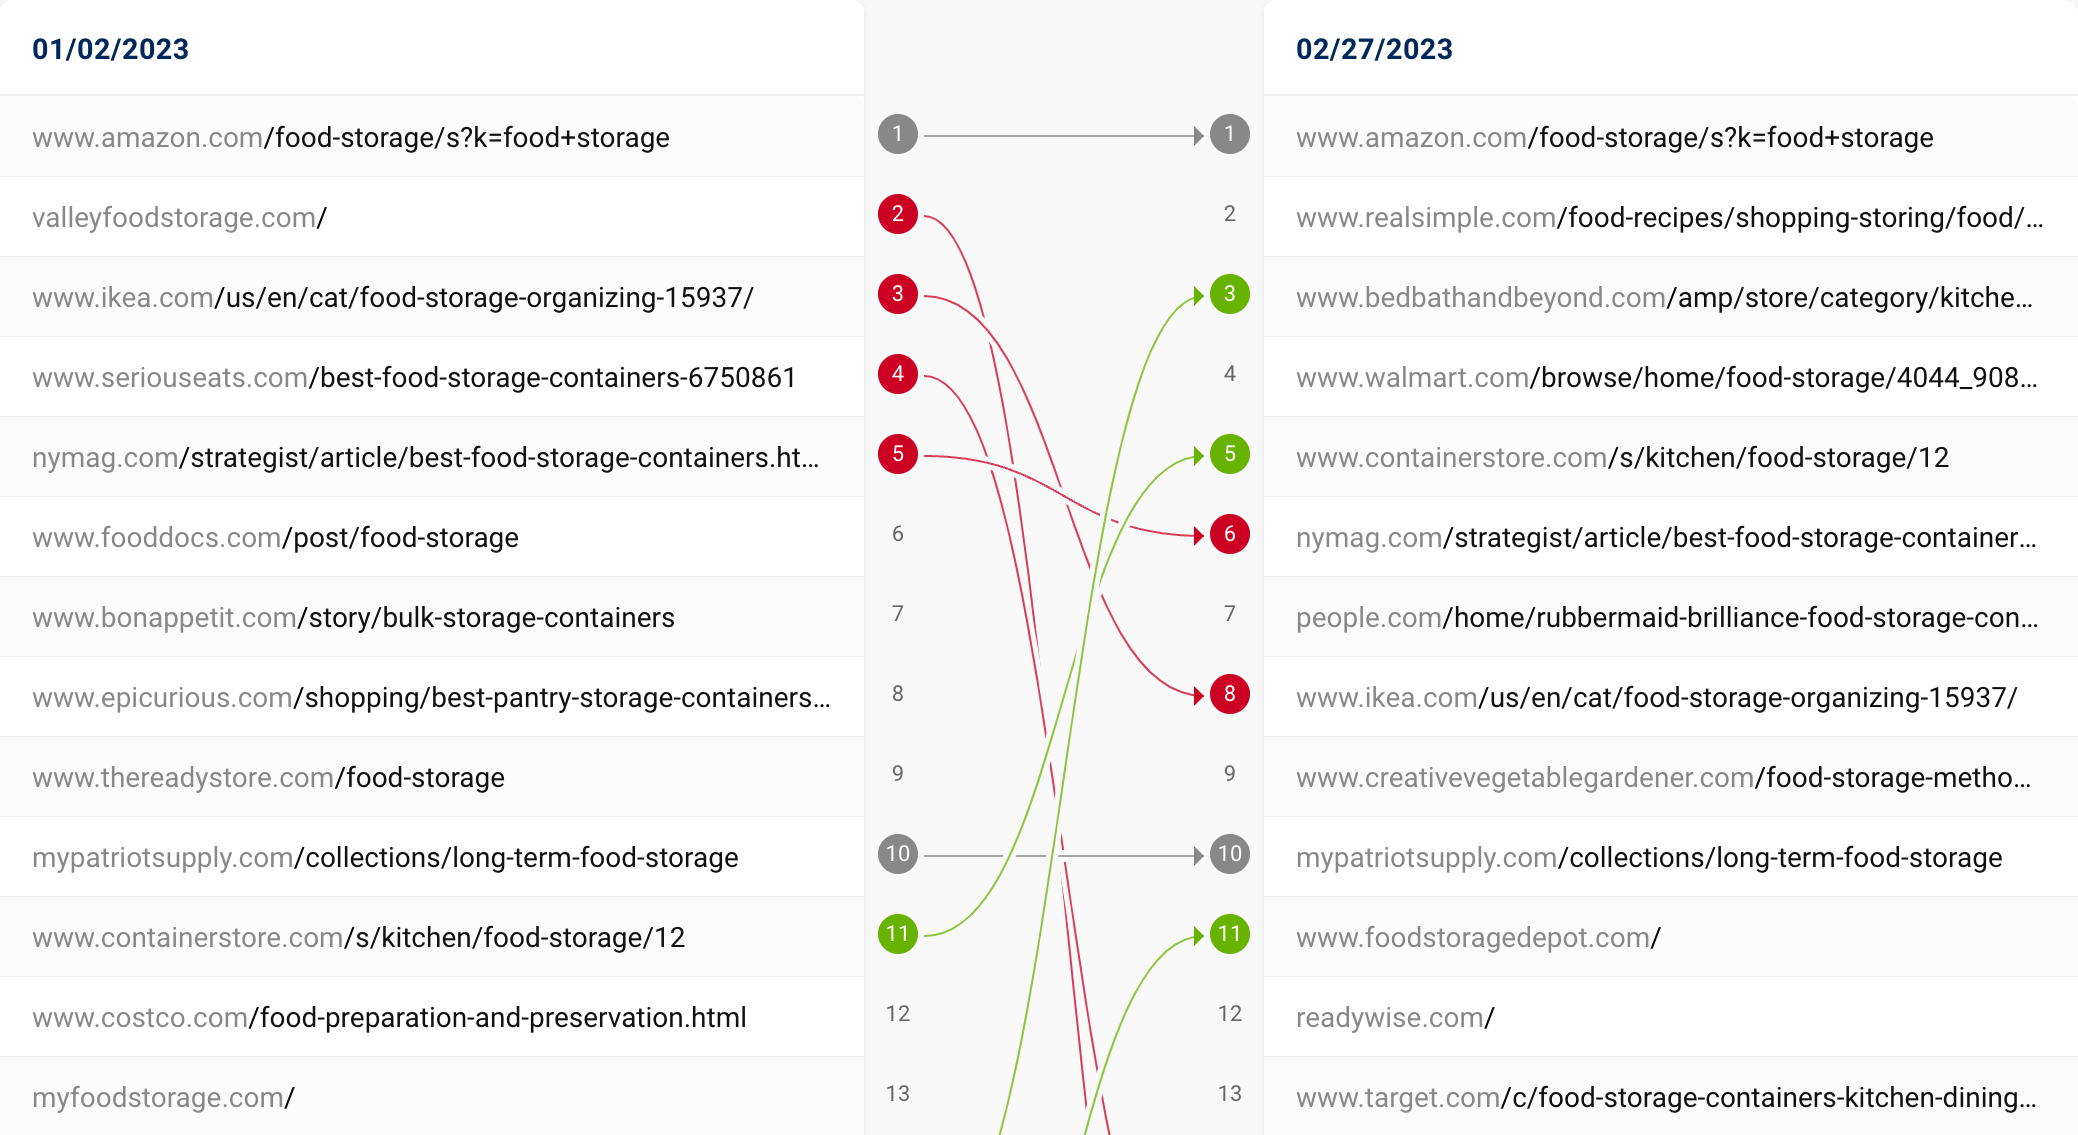 A comparison of the SERPs for the keyword "food storage" on the dates 01/02/2023 and 02/27/2023.